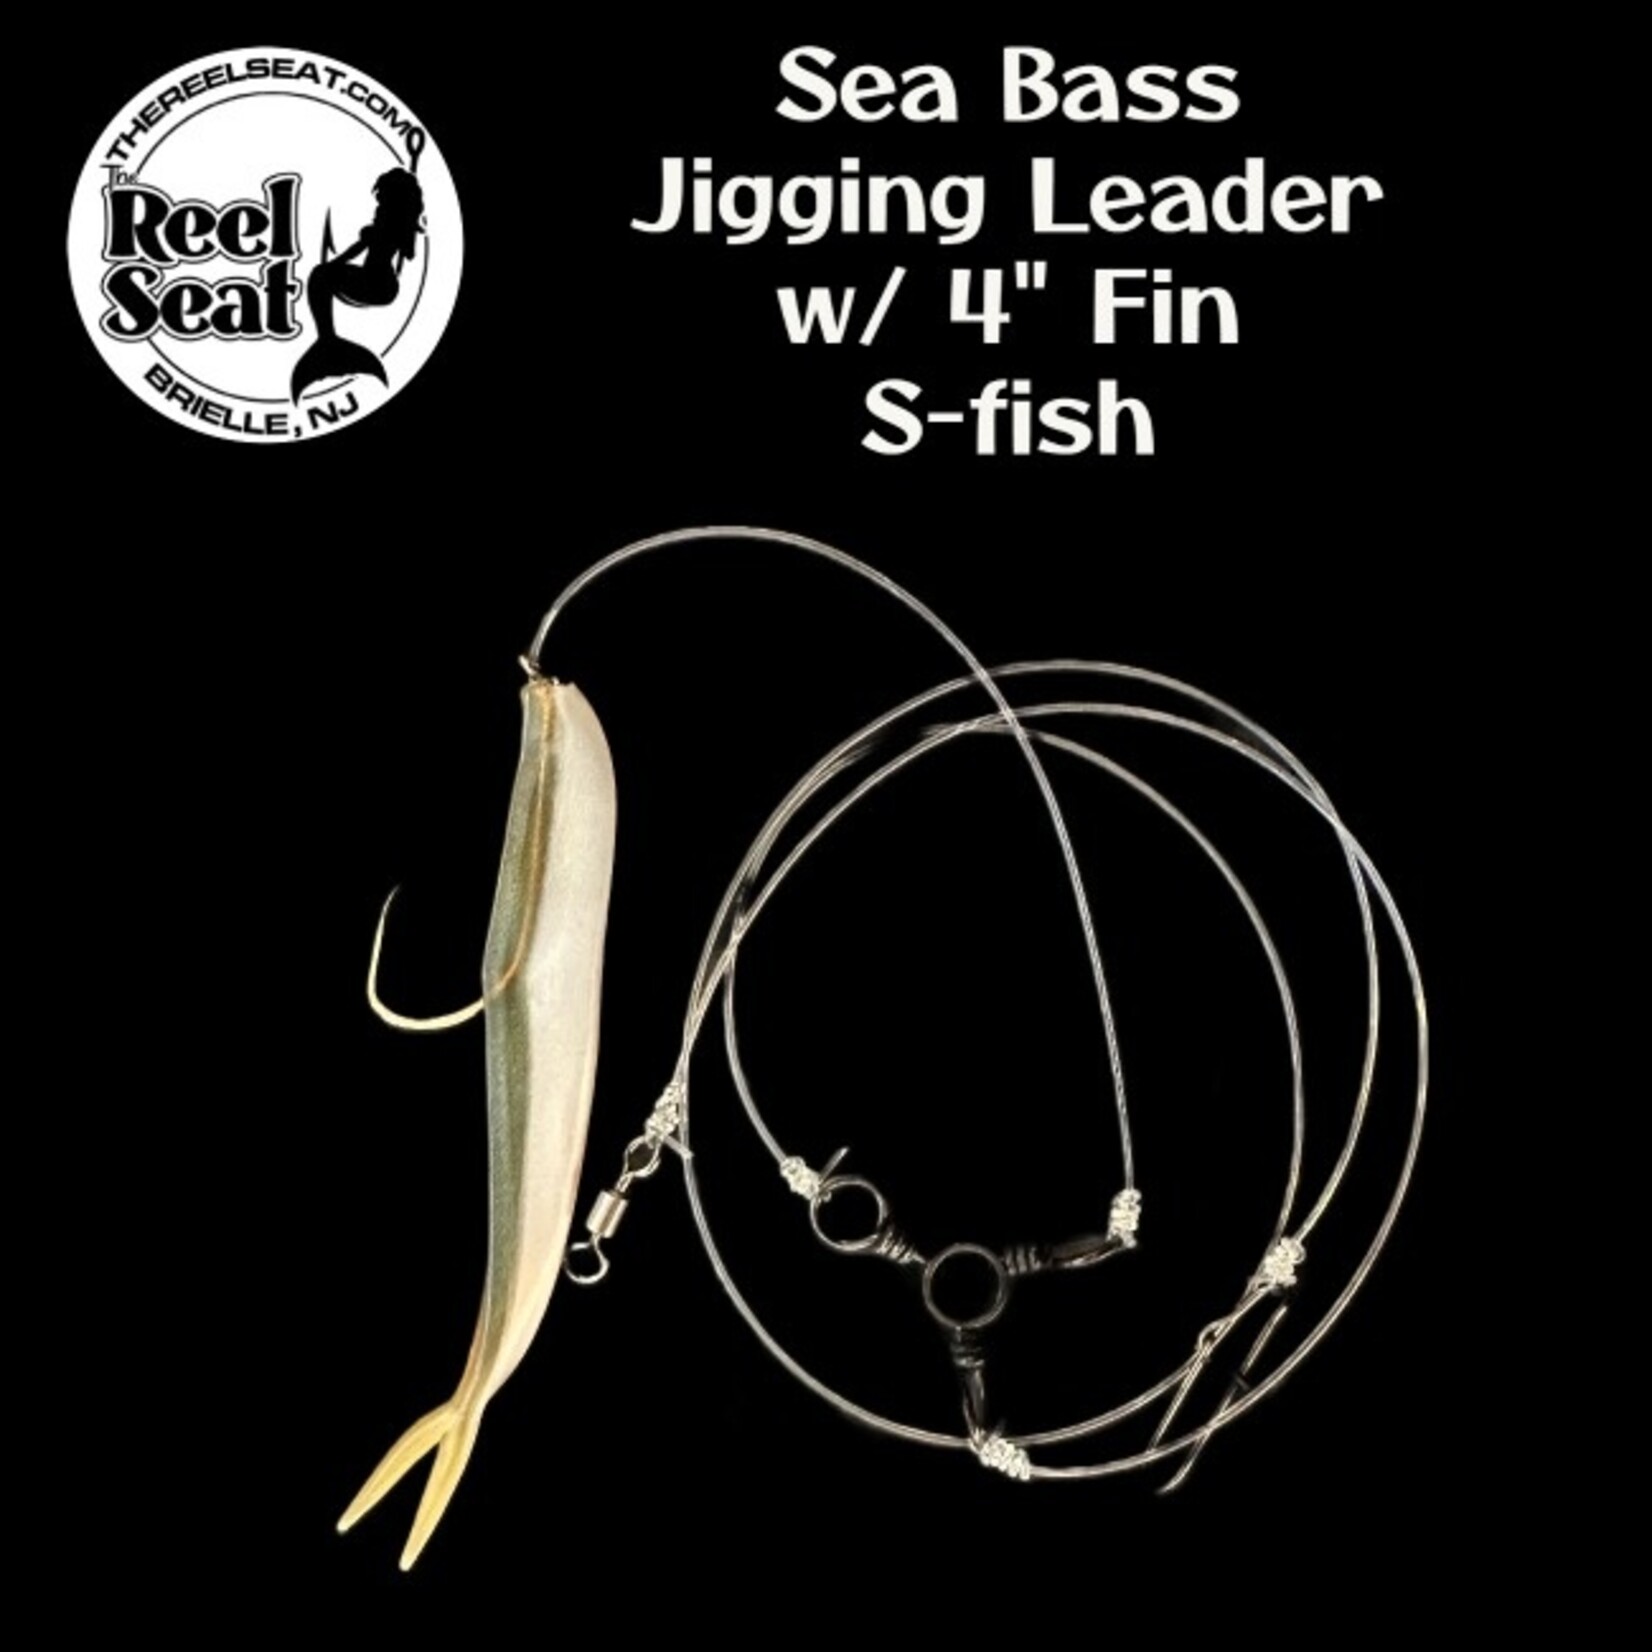 The Reel Seat RS Sea Bass Jigging Leader w/ 4" Fin S-fish